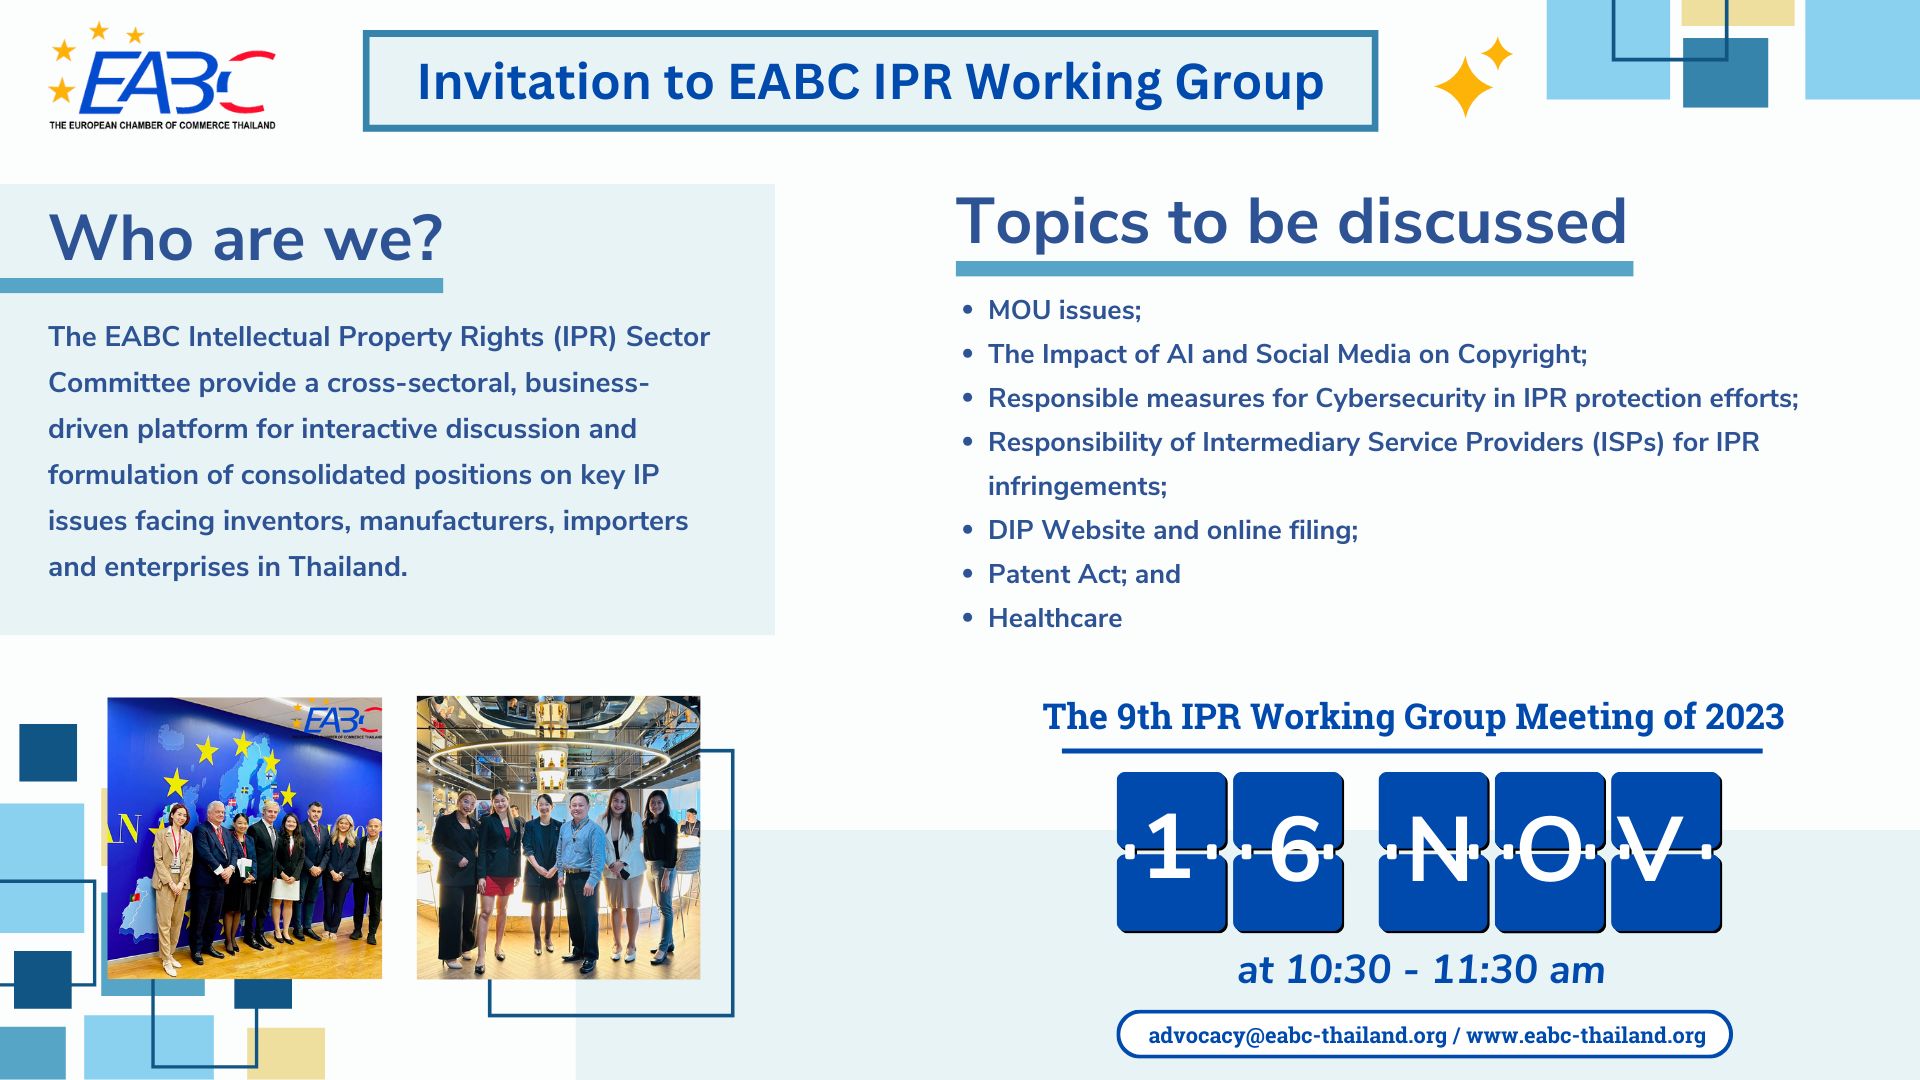 Invitation to EABC IPR Working Group Meeting for EABC Members